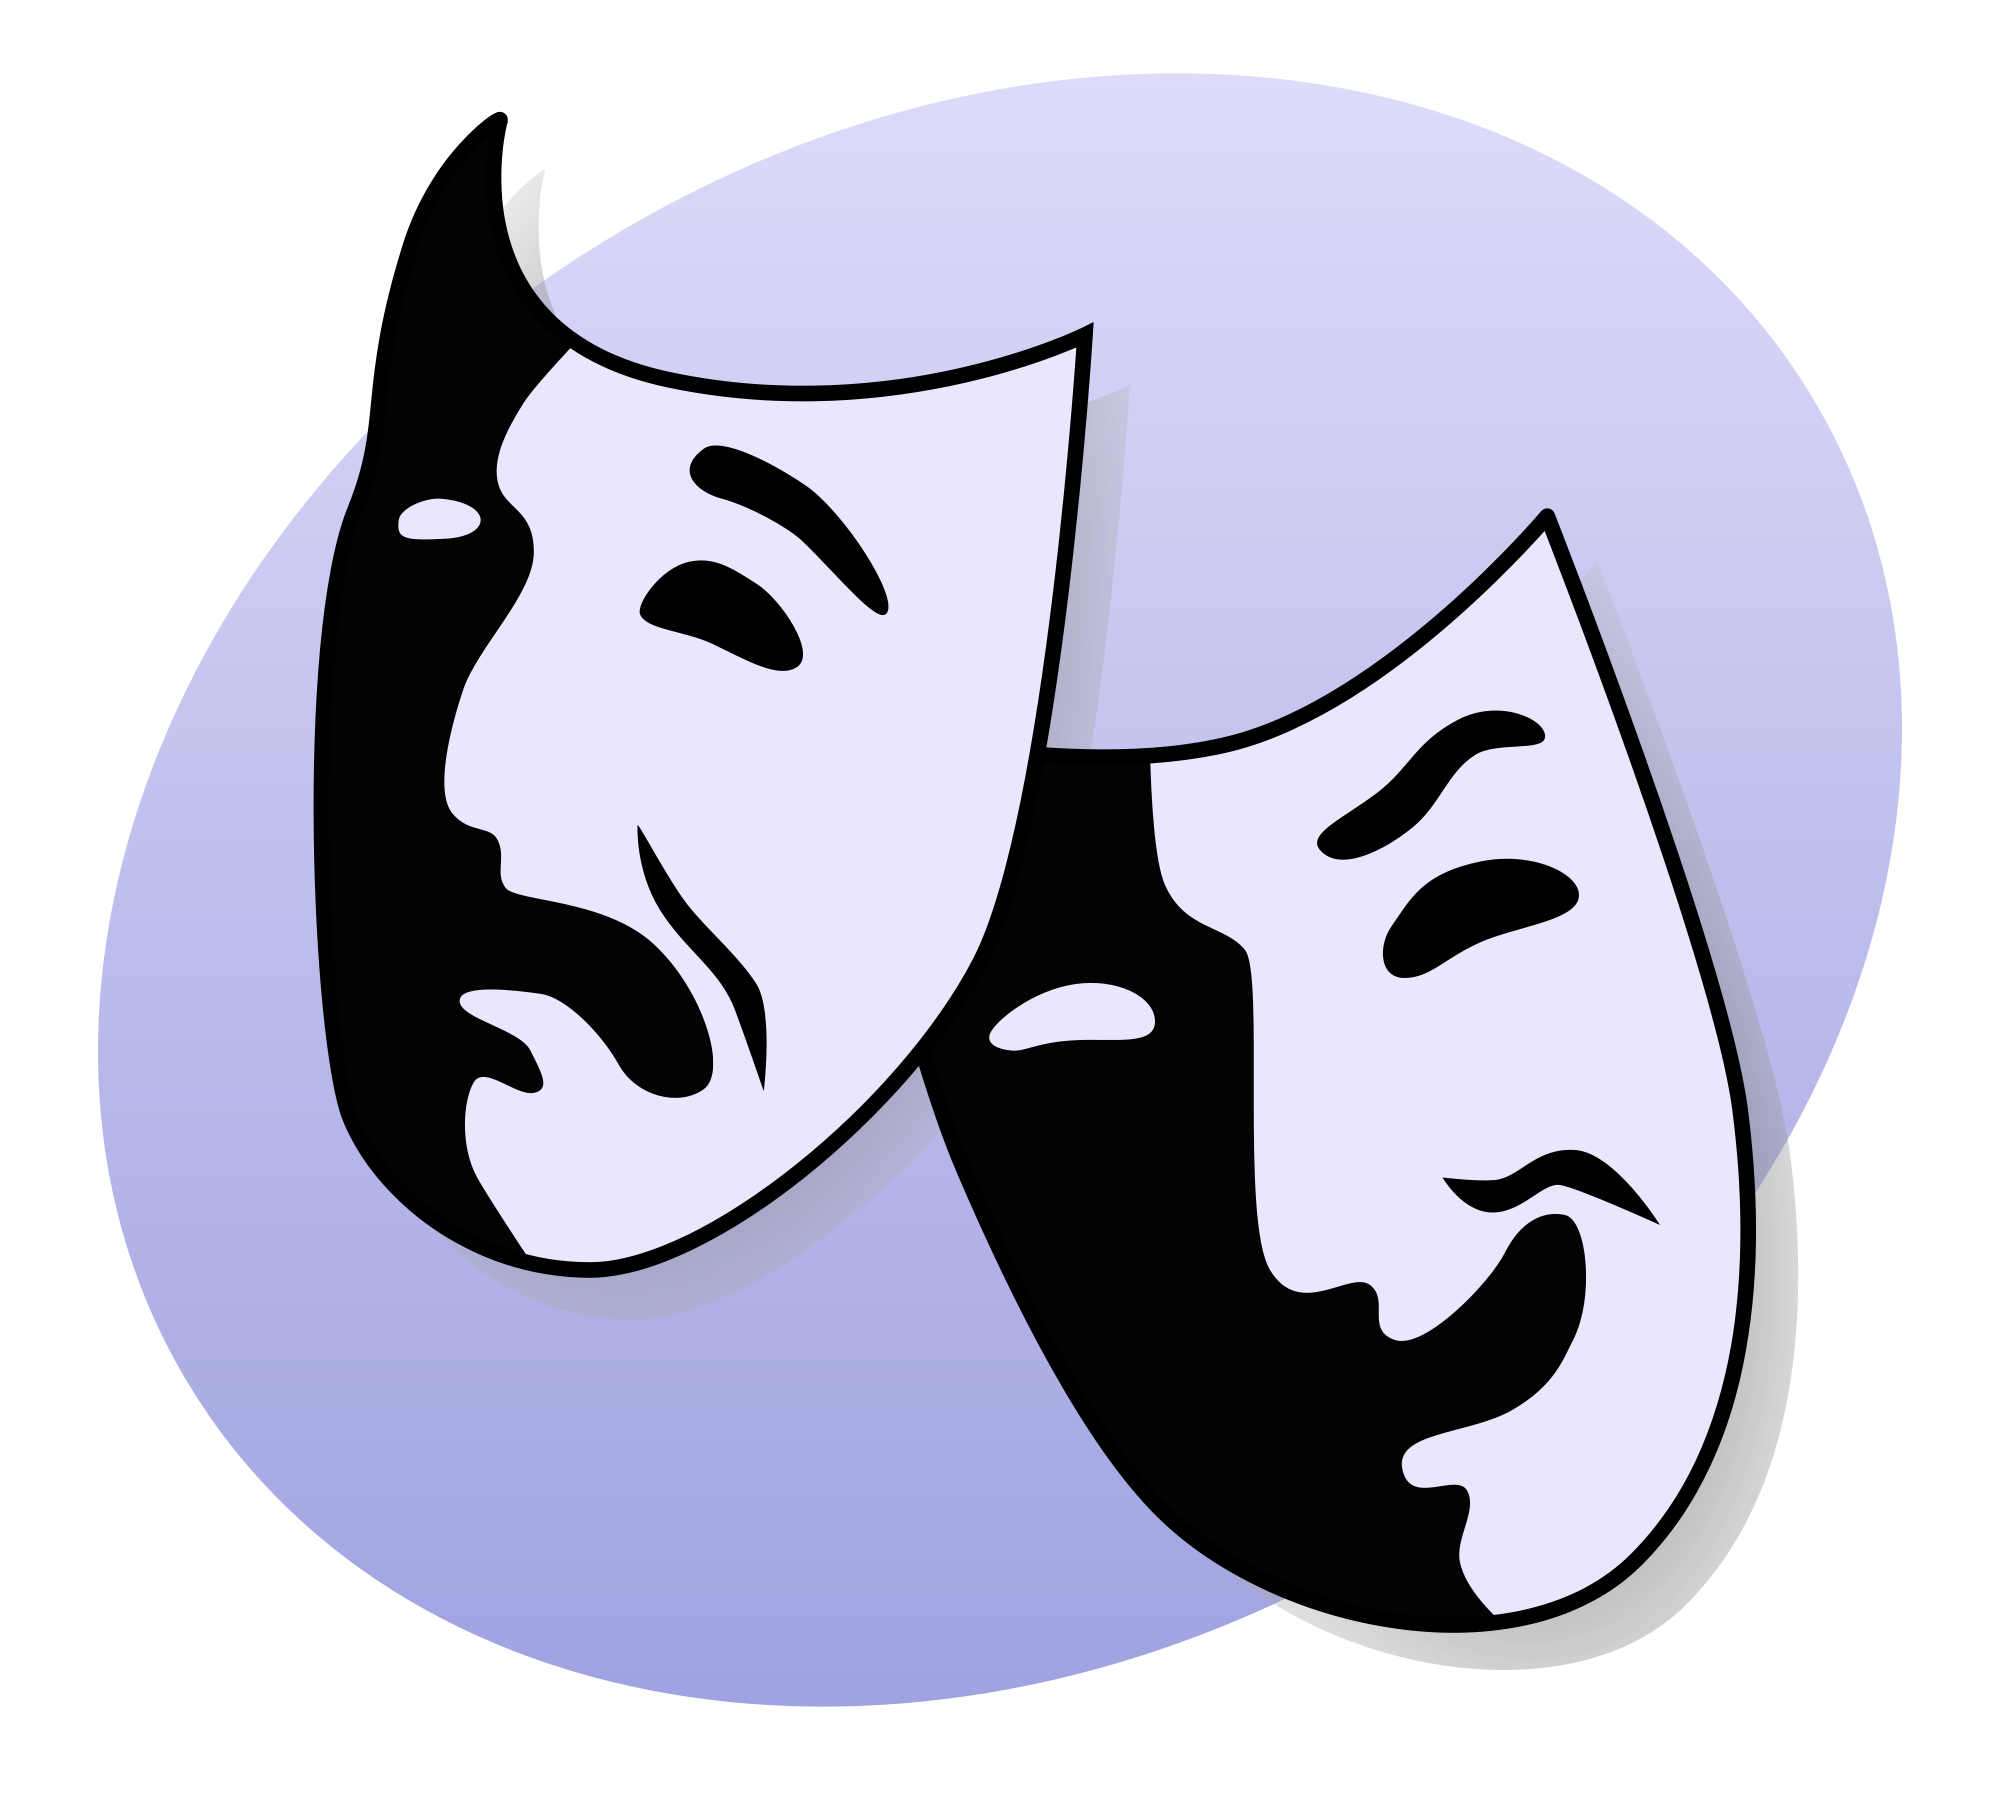 Theater Symbols Related Keywords & Suggestions - Theater Symbols ...